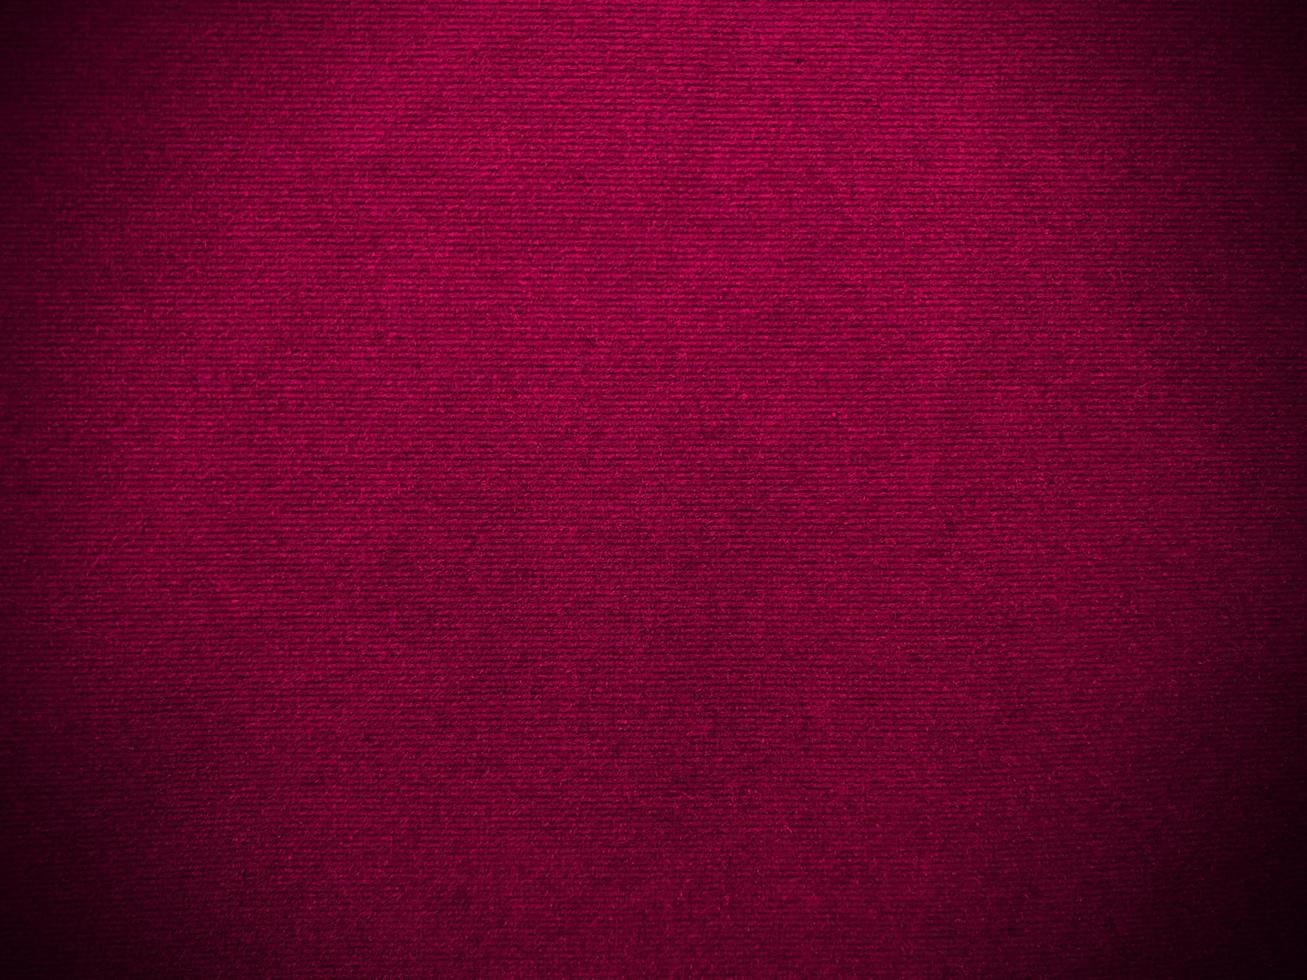 Magenta velvet fabric texture used as background. Empty magenta fabric background of soft and smooth textile material. There is space for text. photo